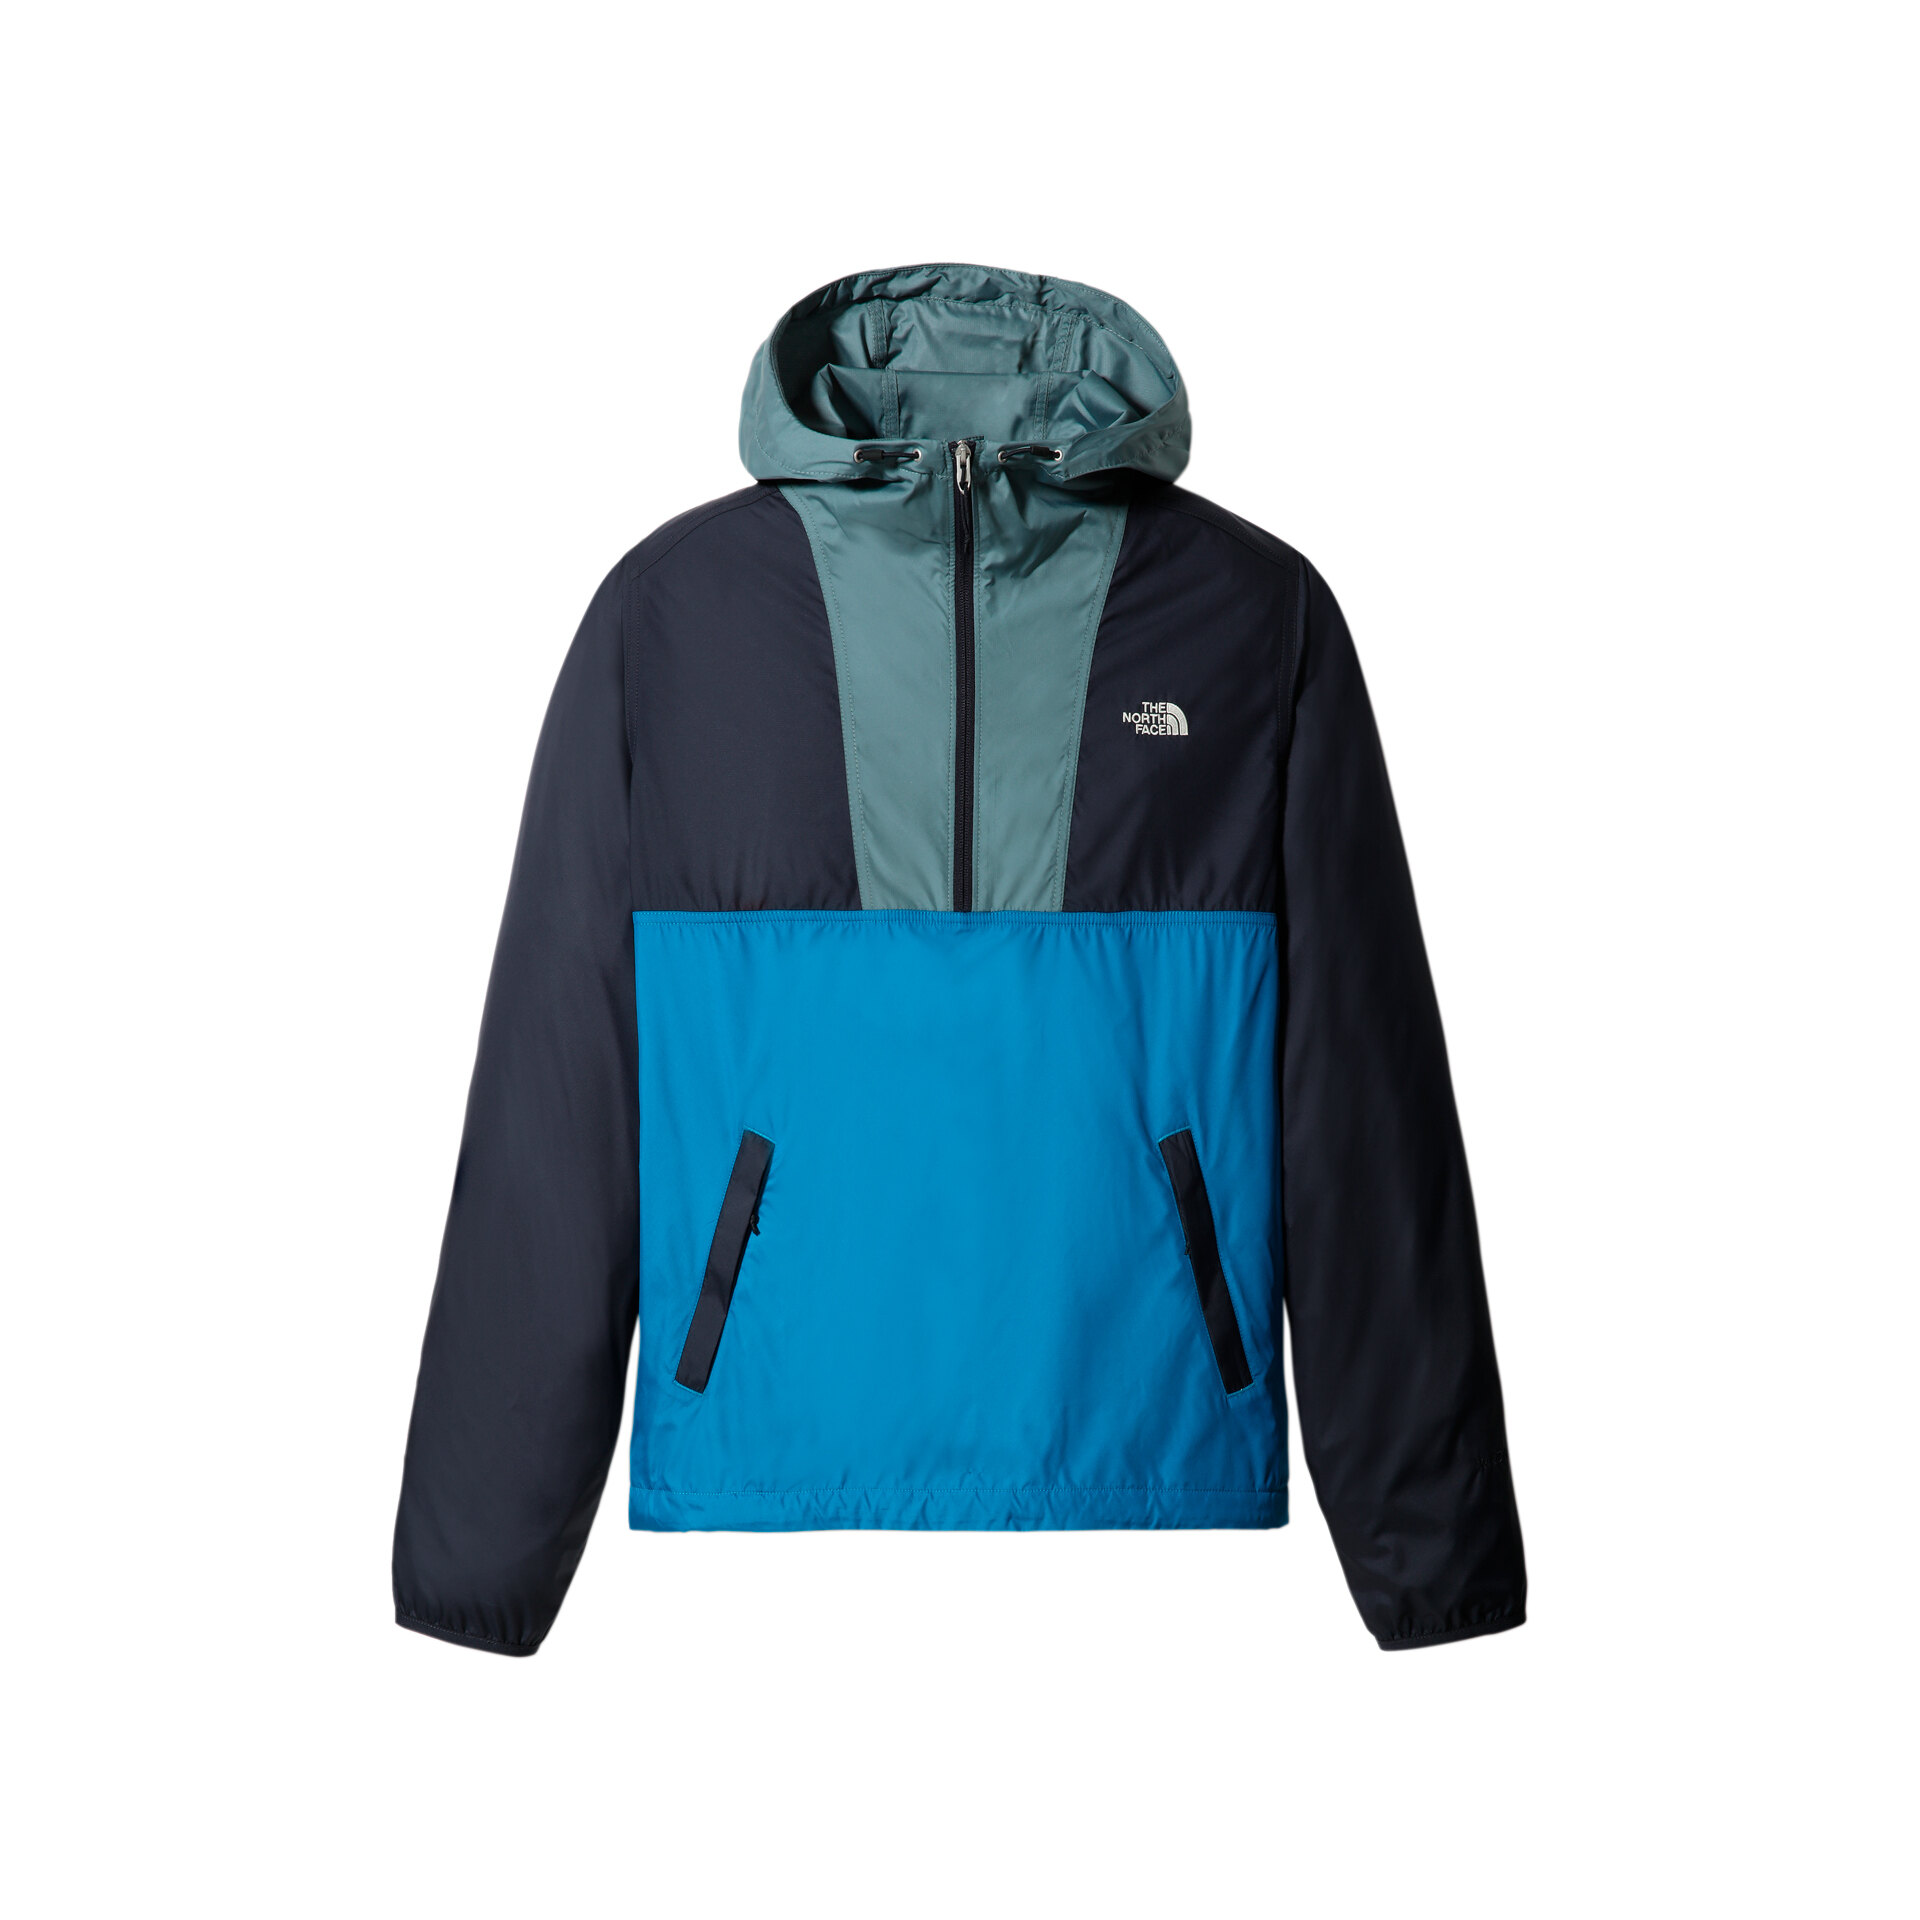 The North Face Chaqueta Hombre M CYCLONE ANORAK vista frontal